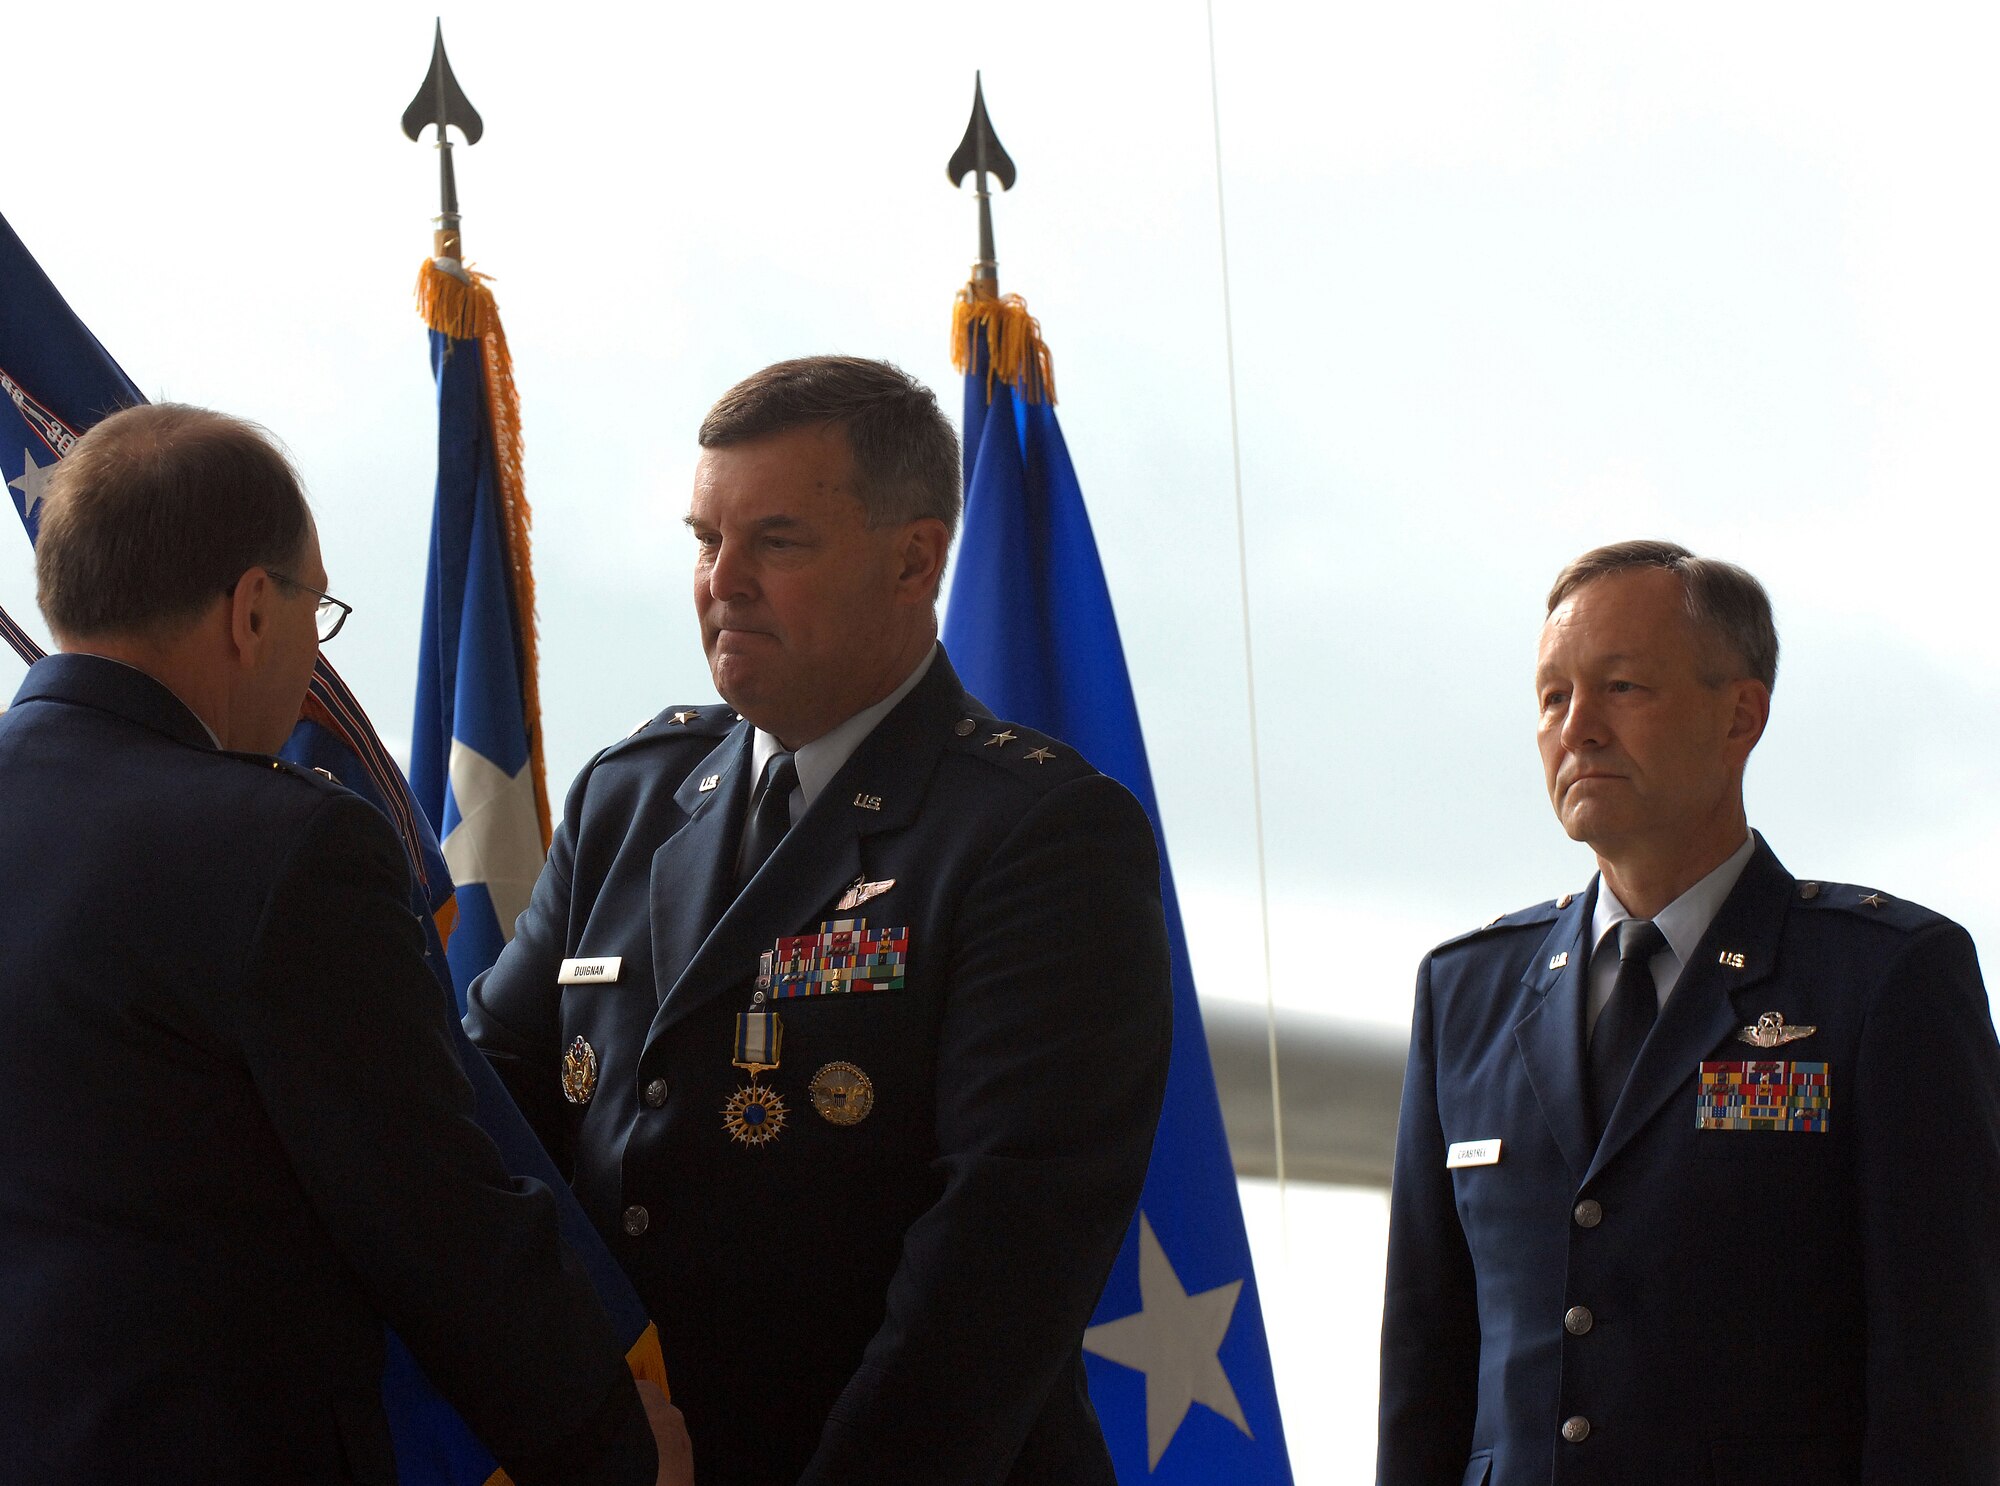 Lt. Gen. Charles E. Stenner Jr., left, commander of Air Force Reserve Command, receives the 4th Air Force command flag from Maj. Gen. Robert E. Duignan as Brig. Gen. Eric. W. Crabtree stands by to accept command of the numbered air force. General Duignan relinquished his command and retired during ceremonies at March Air Reserve Base, Calif., Jan. 25, 2009. (U.S. Air Force photo/Tech. Sgt. Tech. Sgt. Joselito Aribuabo)